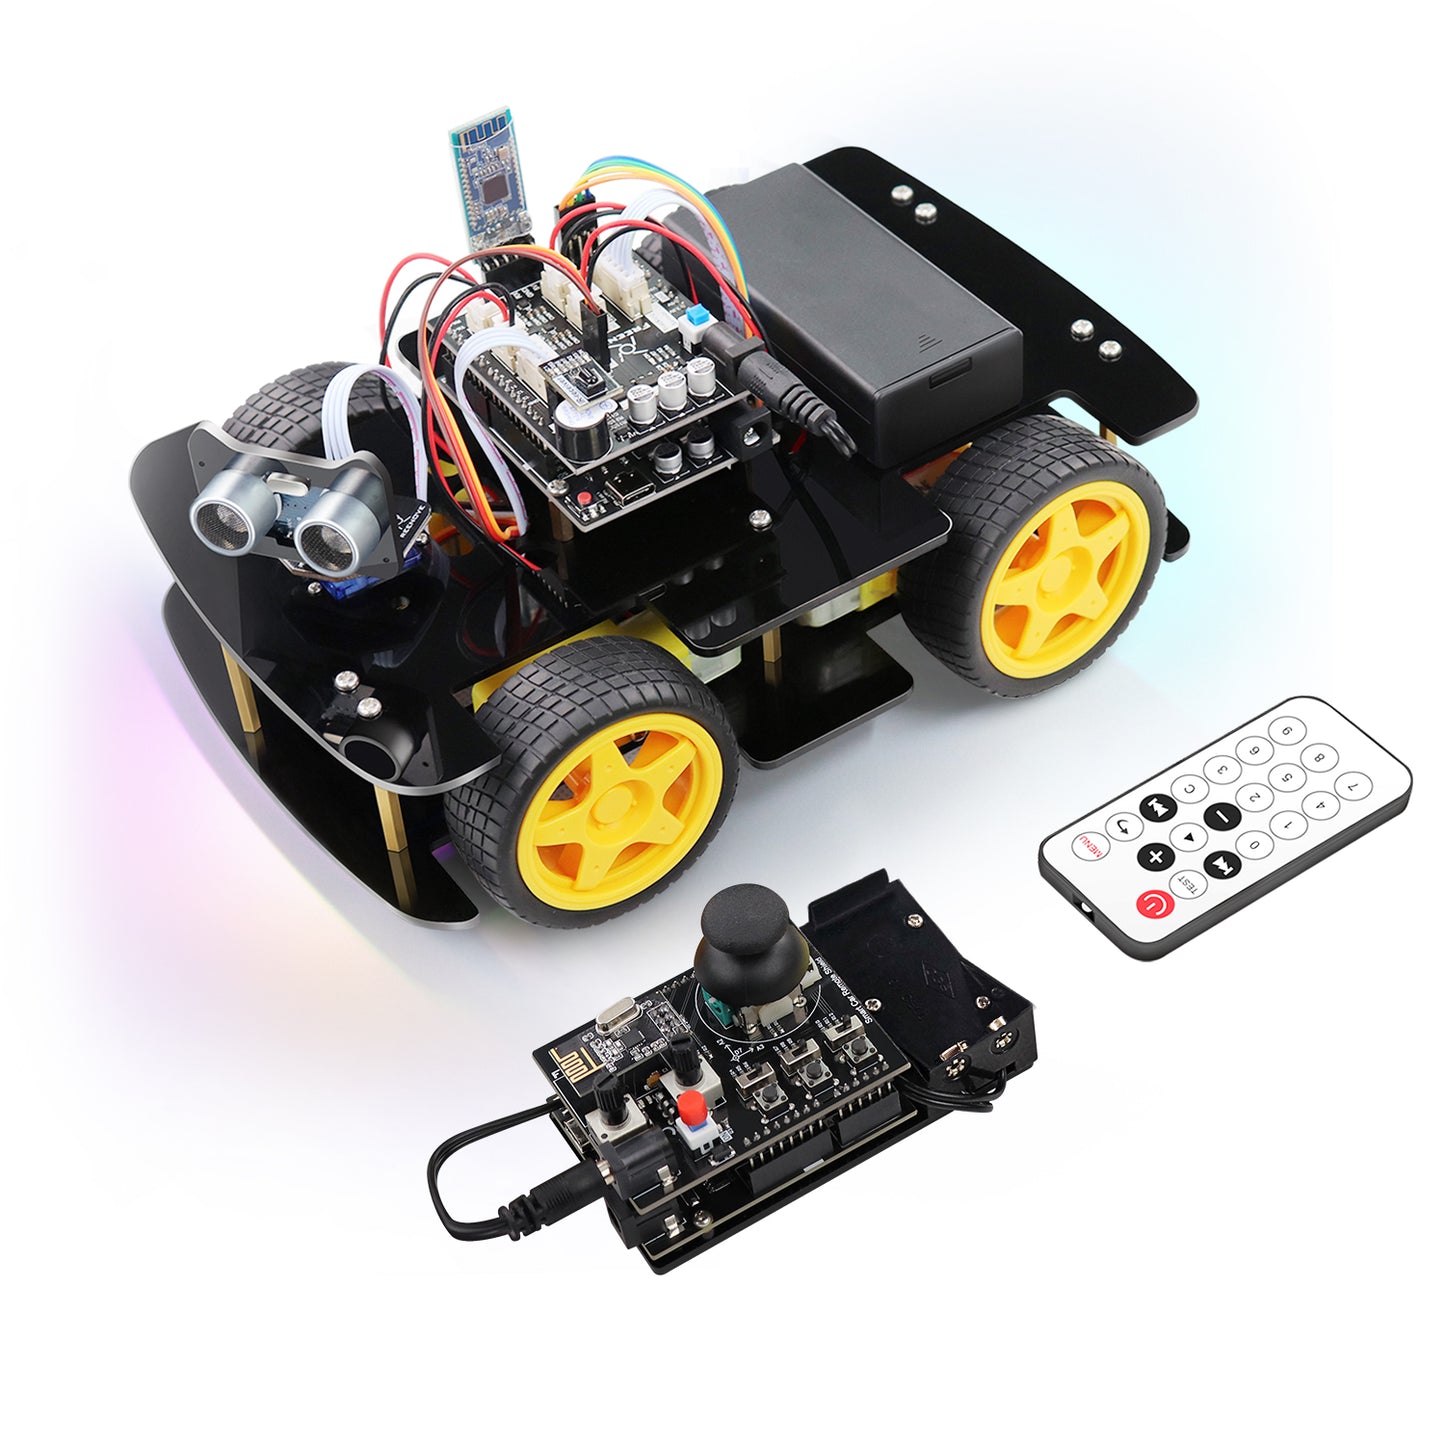 Freenove 4WD Car Kit (Compatible with Arduino IDE)